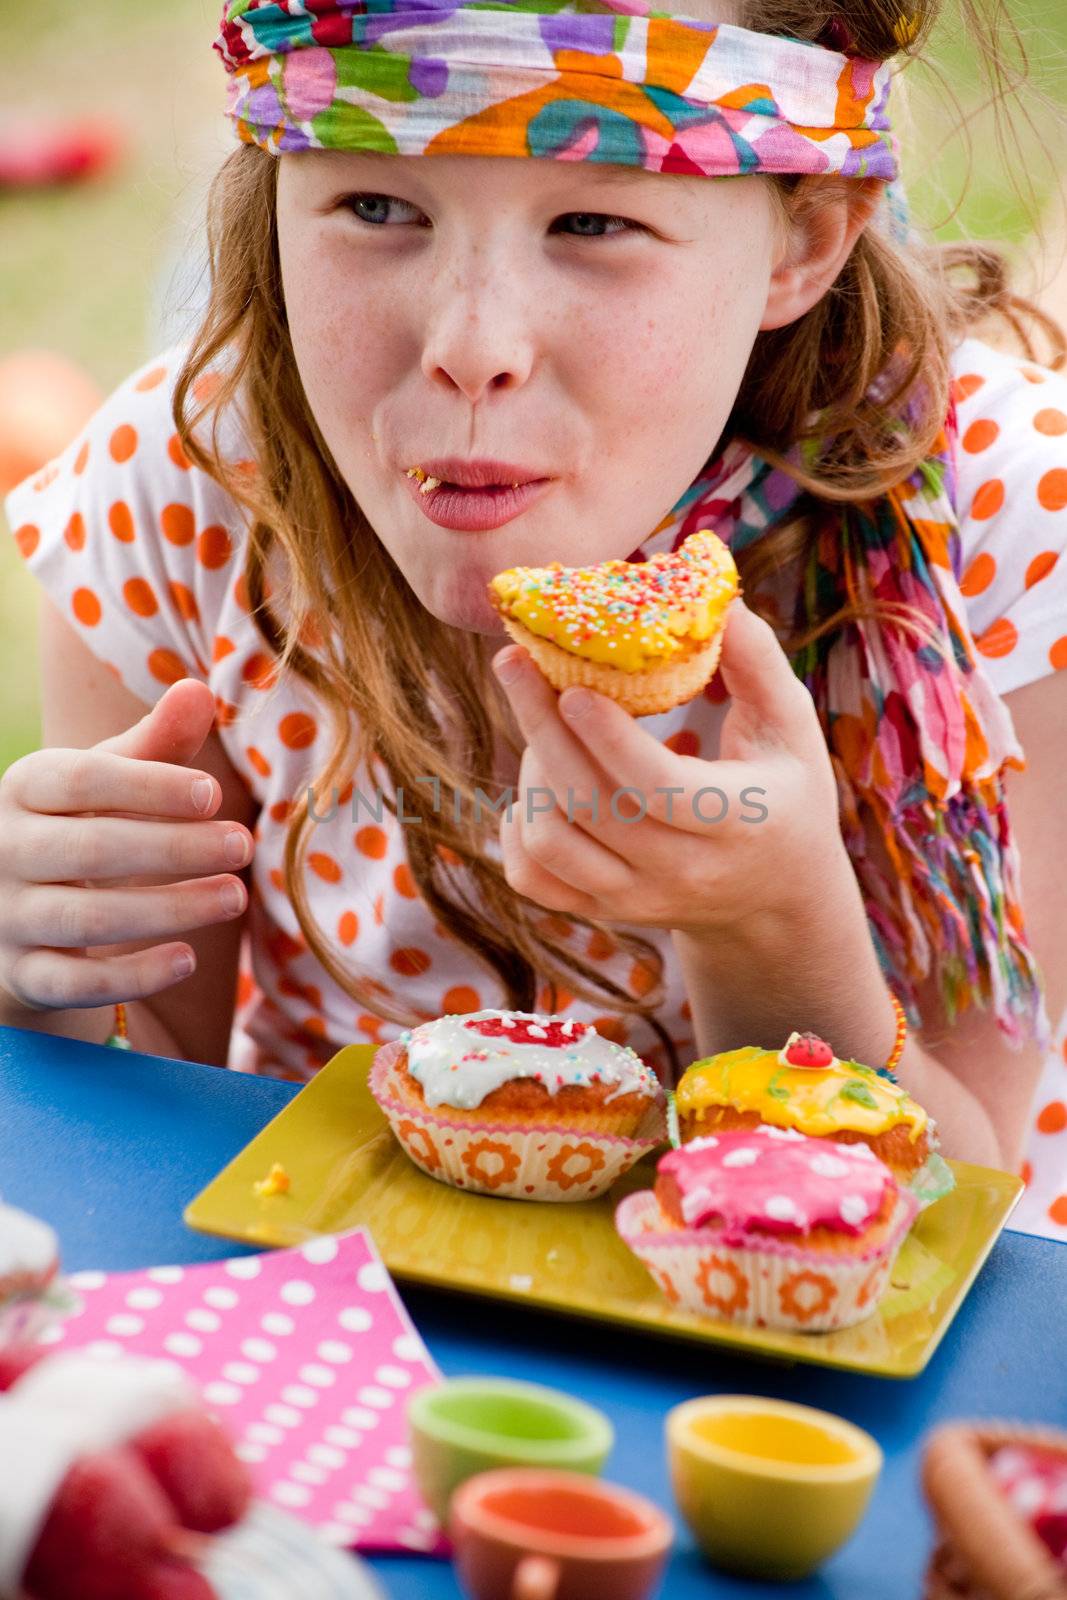 Happy eating cupcake girl by DNFStyle